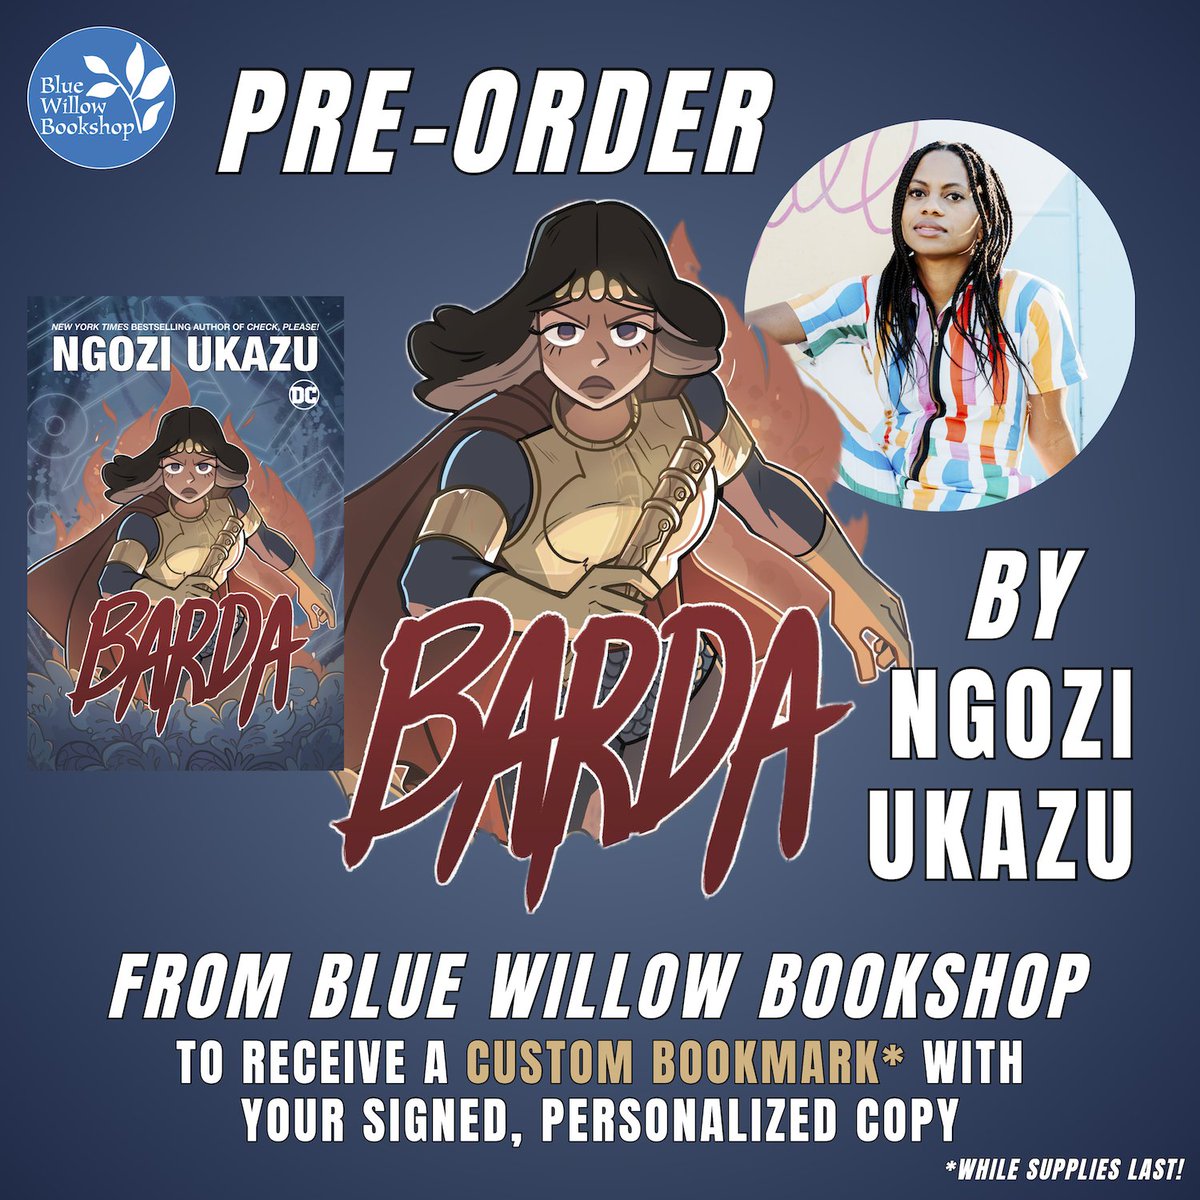 BARDA comes out in a few weeks! If you'd like me to sign and personalize your copy, pre-order BARDA from @BlueWillowBooks here: bluewillowbookshop.com/pre-order-barda